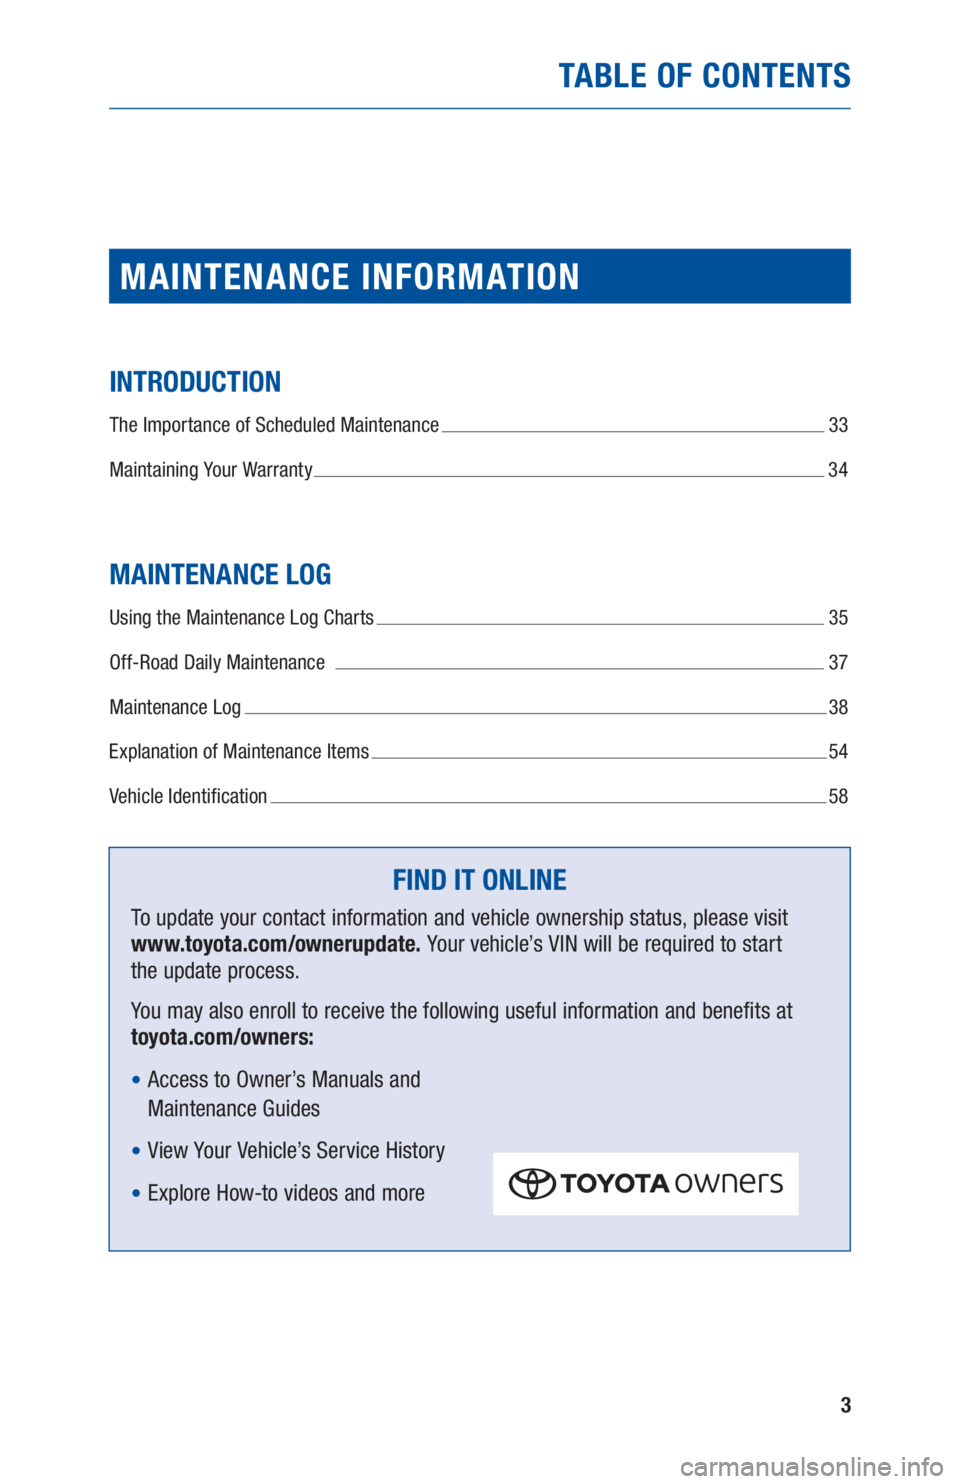 TOYOTA TACOMA 2019  Warranties & Maintenance Guides (in English) 3
TABLE OF CONTENTS
MAINTENANCE INFORMATION
INTRODUCTION
The Importance of Scheduled Maintenance  33
Maintaining Your Warranty 
 34
MAINTENANCE LOG
Using the Maintenance Log Charts  35
Off-Road Daily 